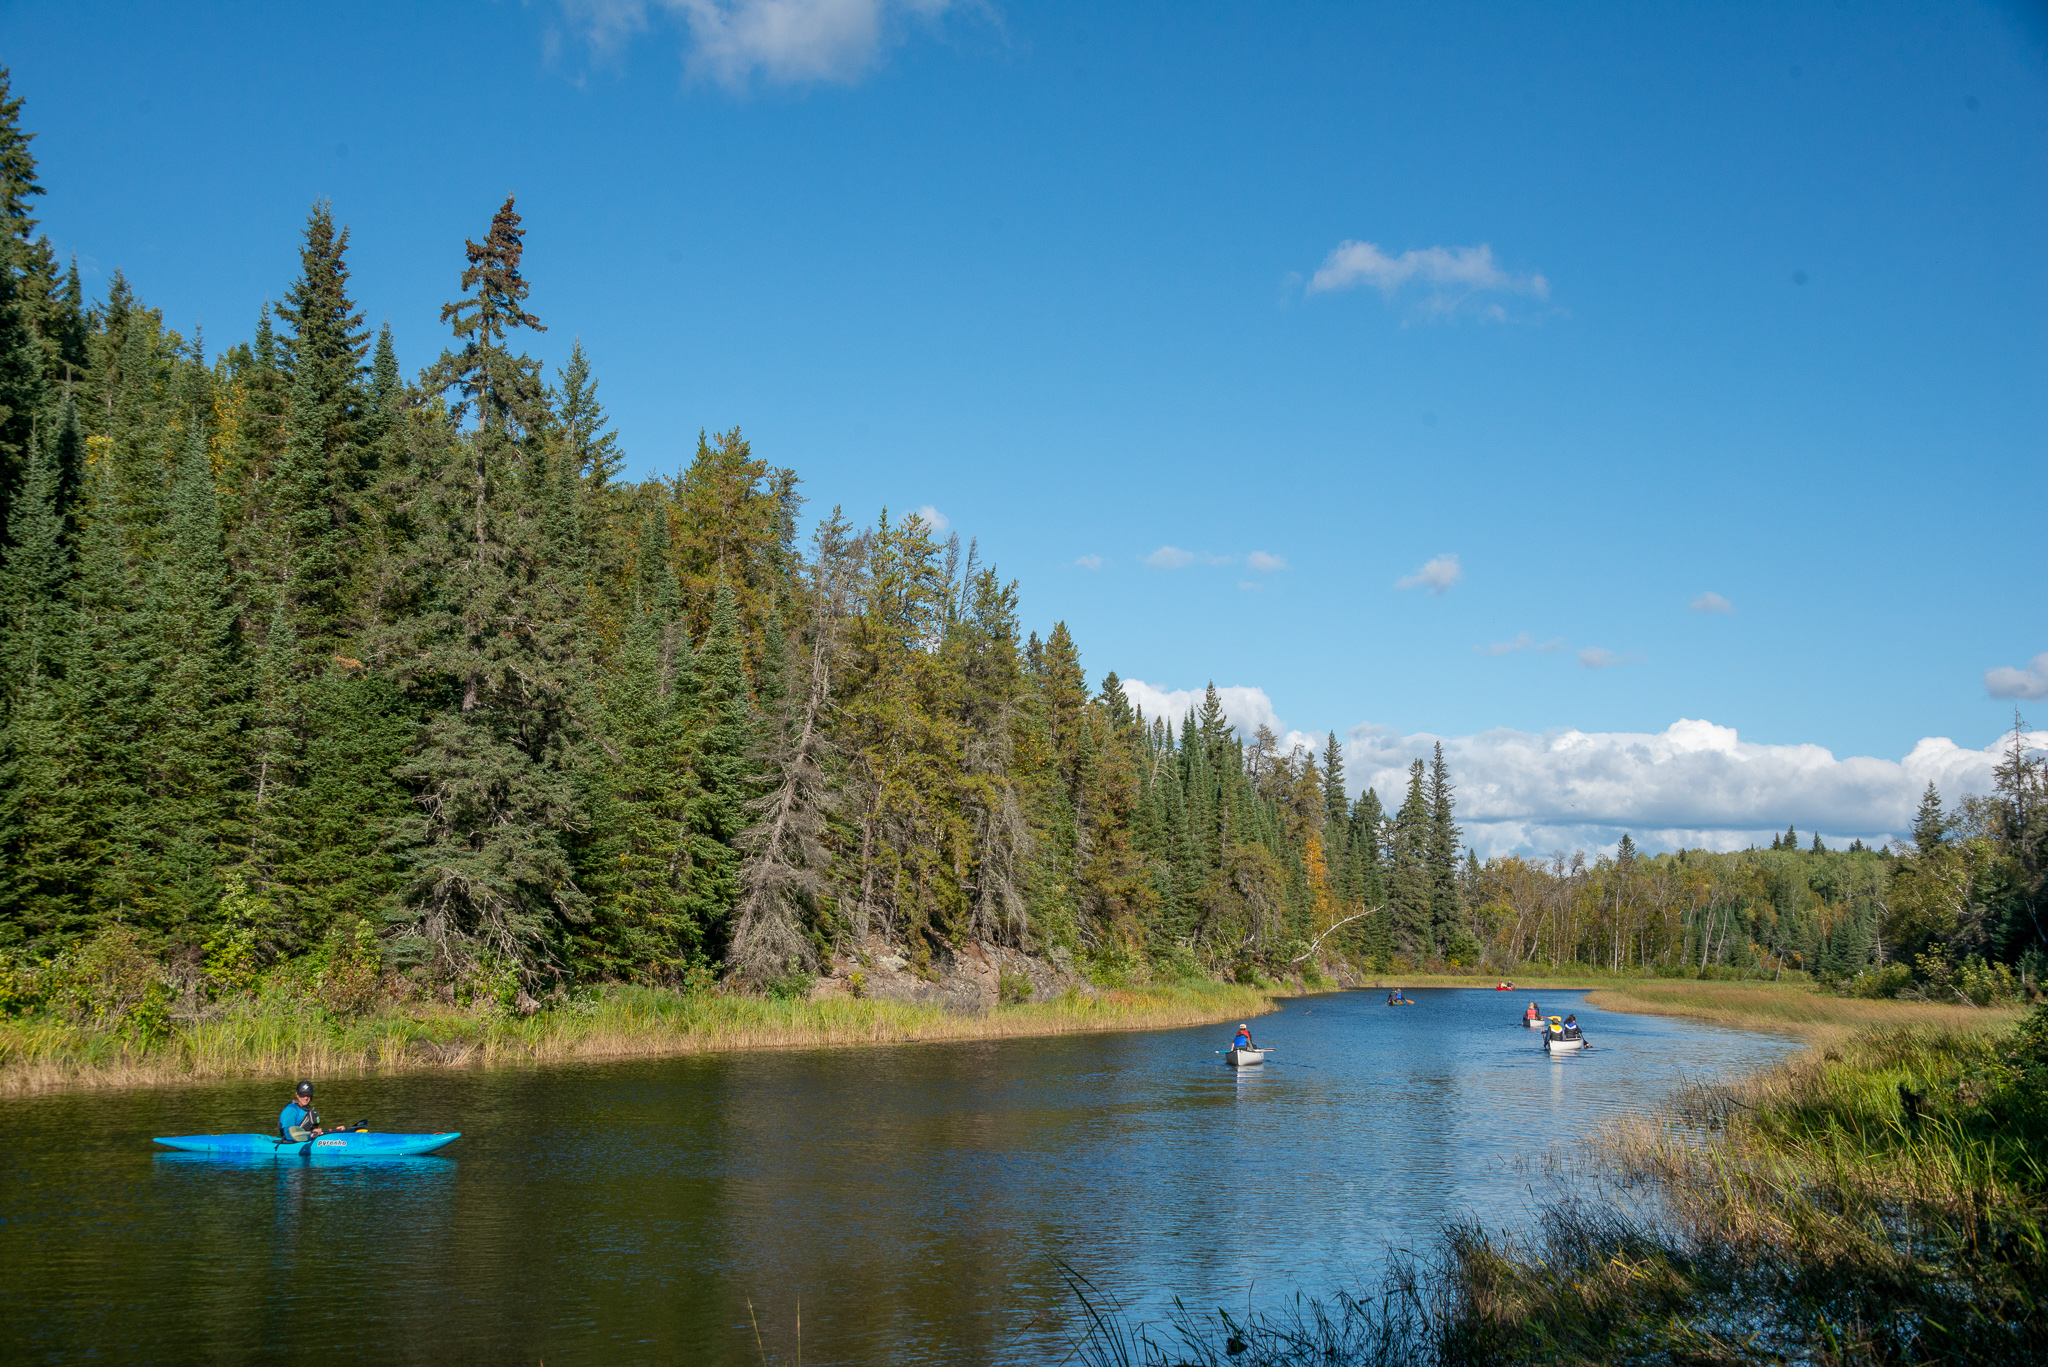 Paddlers on the lower Bird River